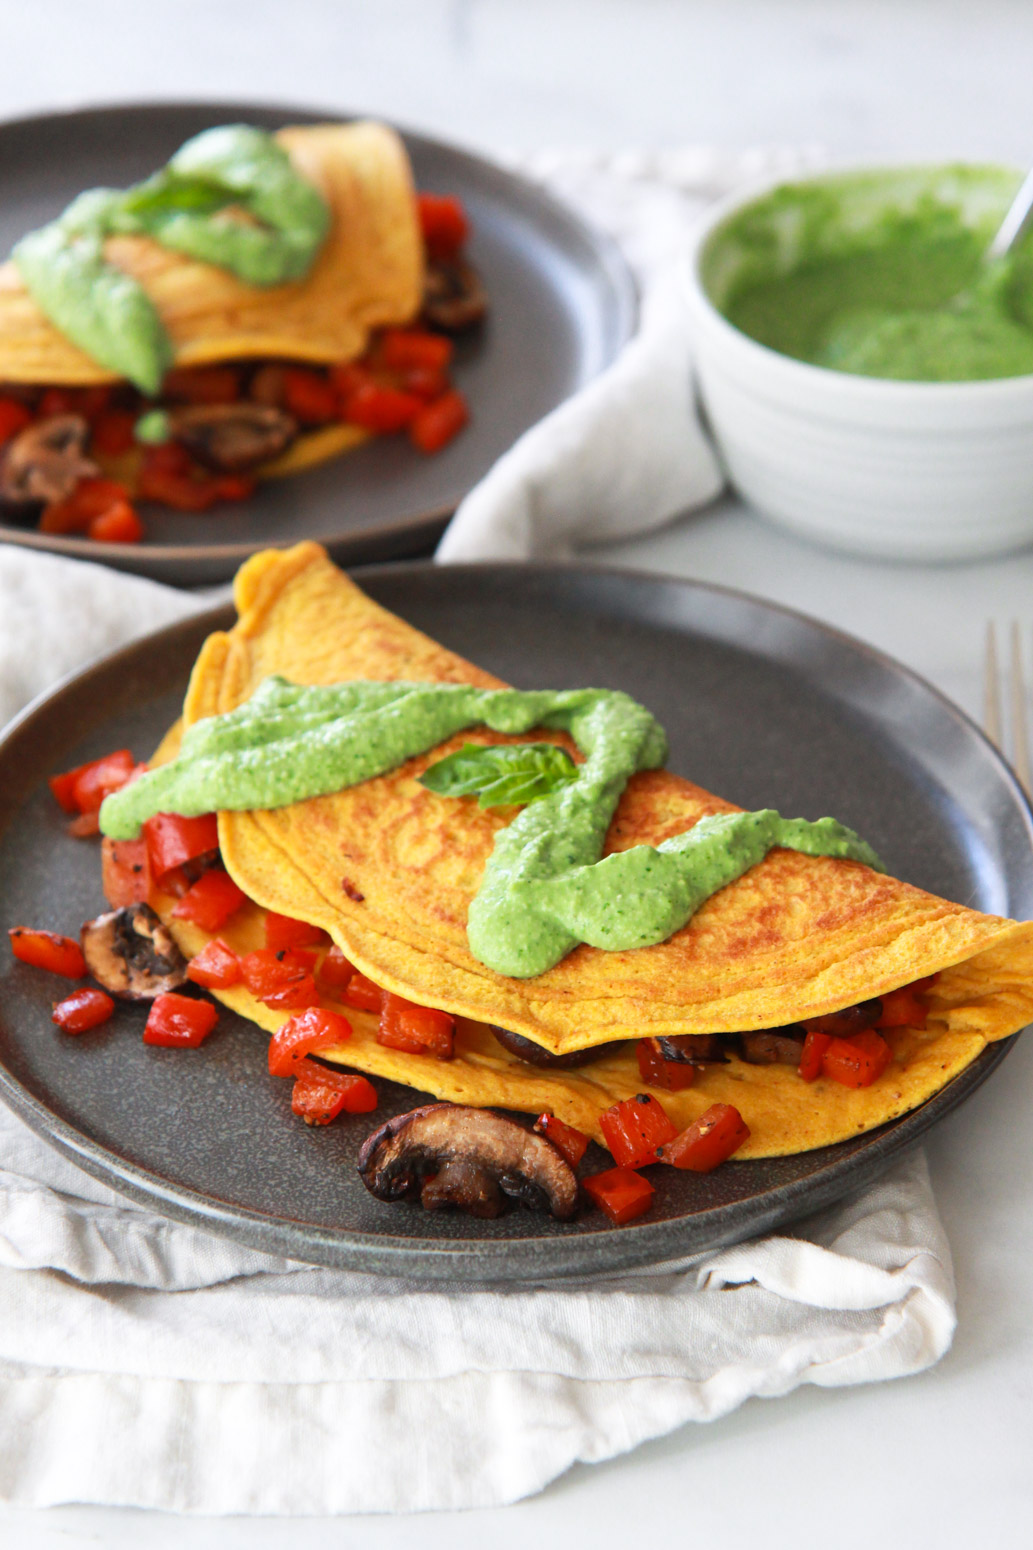 This chickpea omelet recipe is a delicious vegan alternative to a traditional egg omelet. Also gluten-free, this chickpea omelet does not crack or break when flipped, can be stuffed with your favorite veggies, and is topped with a dairy-free avocado pesto.